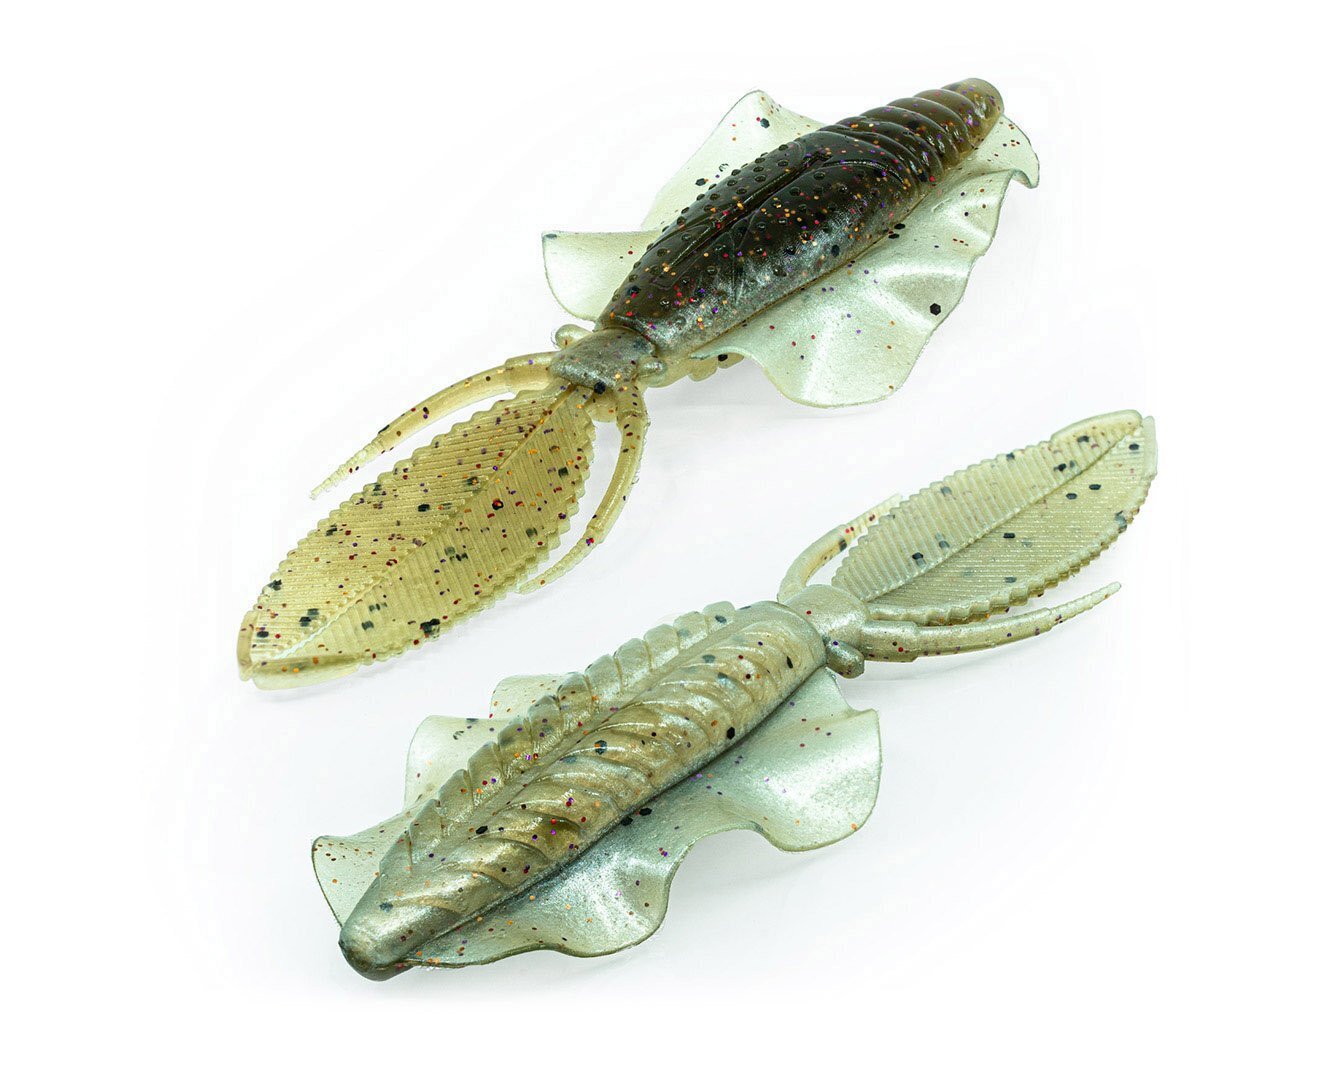 Chasebaits 4.25 Inch 110mm Flip Flop Baits Soft Plastic Fishing Lures -  WATERMELON PEARL